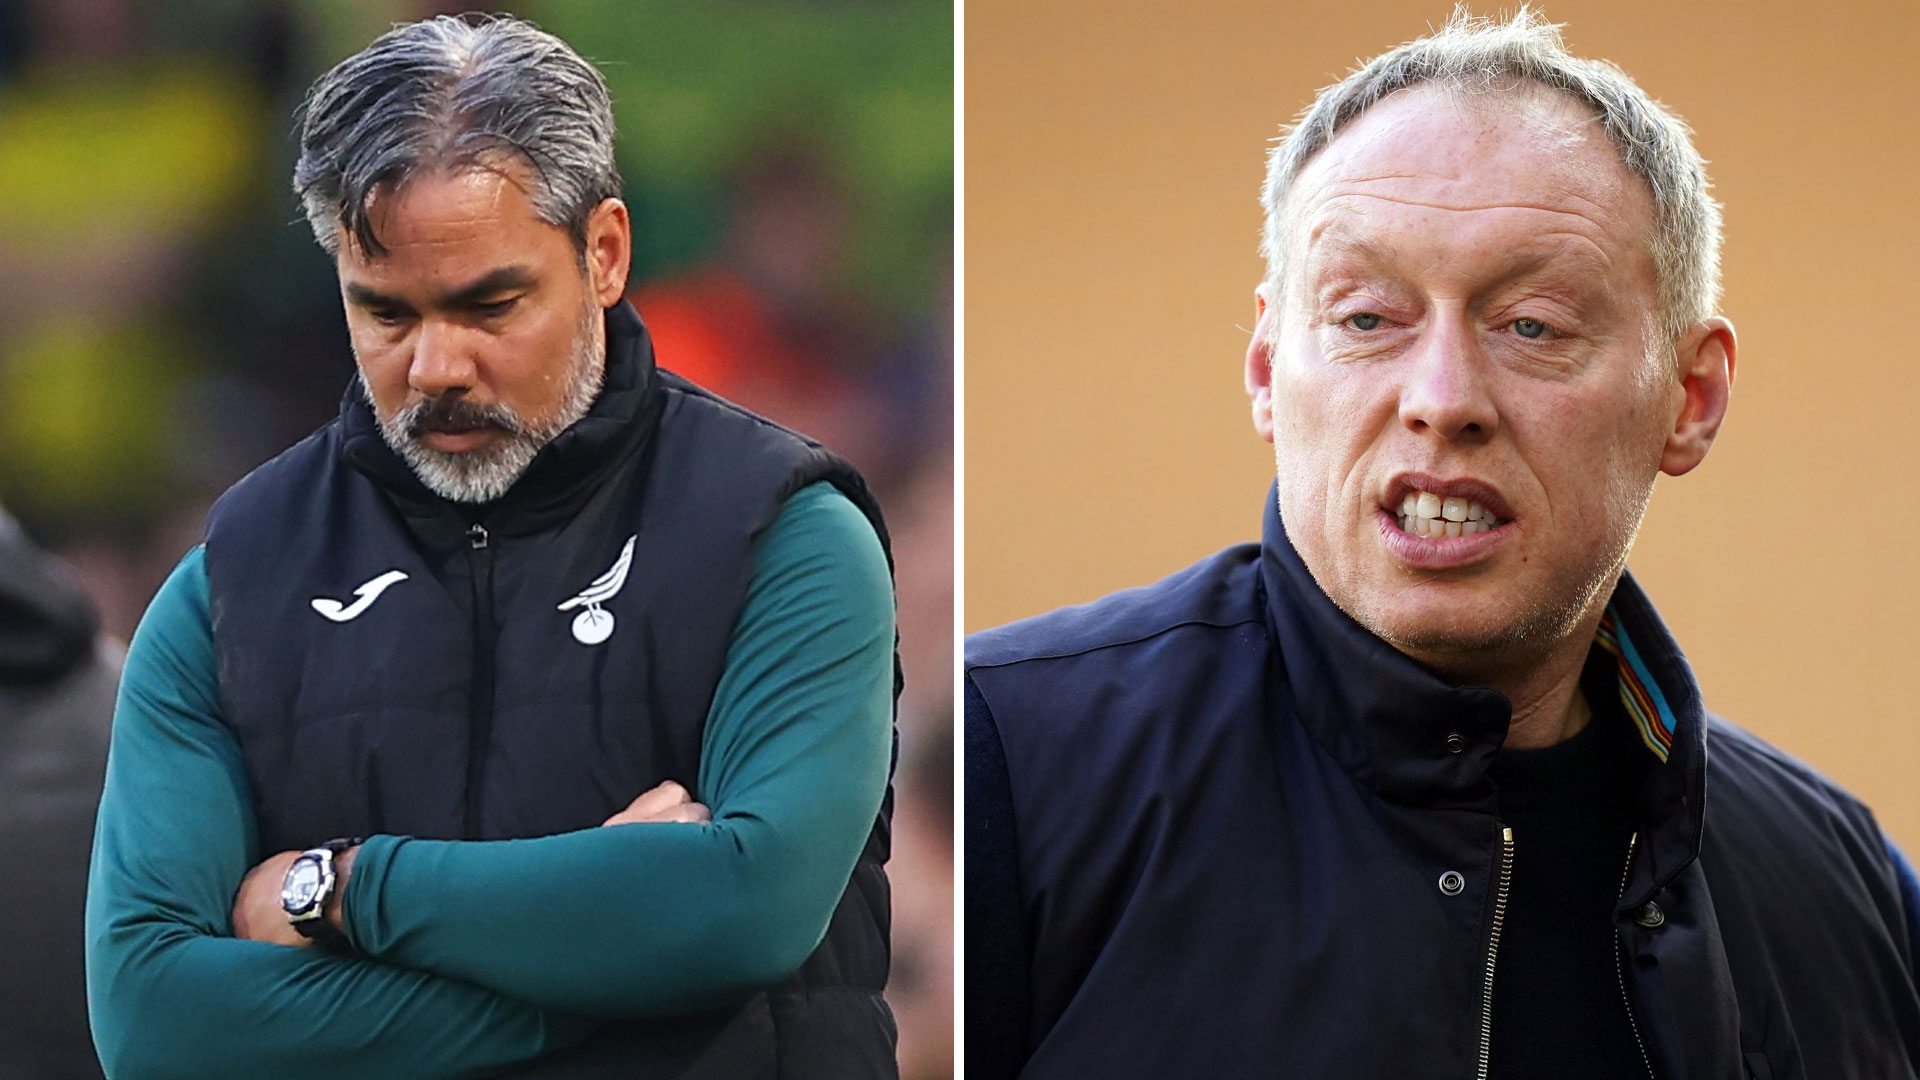 Steve Cooper snubs Norwich approaches as Canaries identify top target after brutally sacking David Wagner [Video]